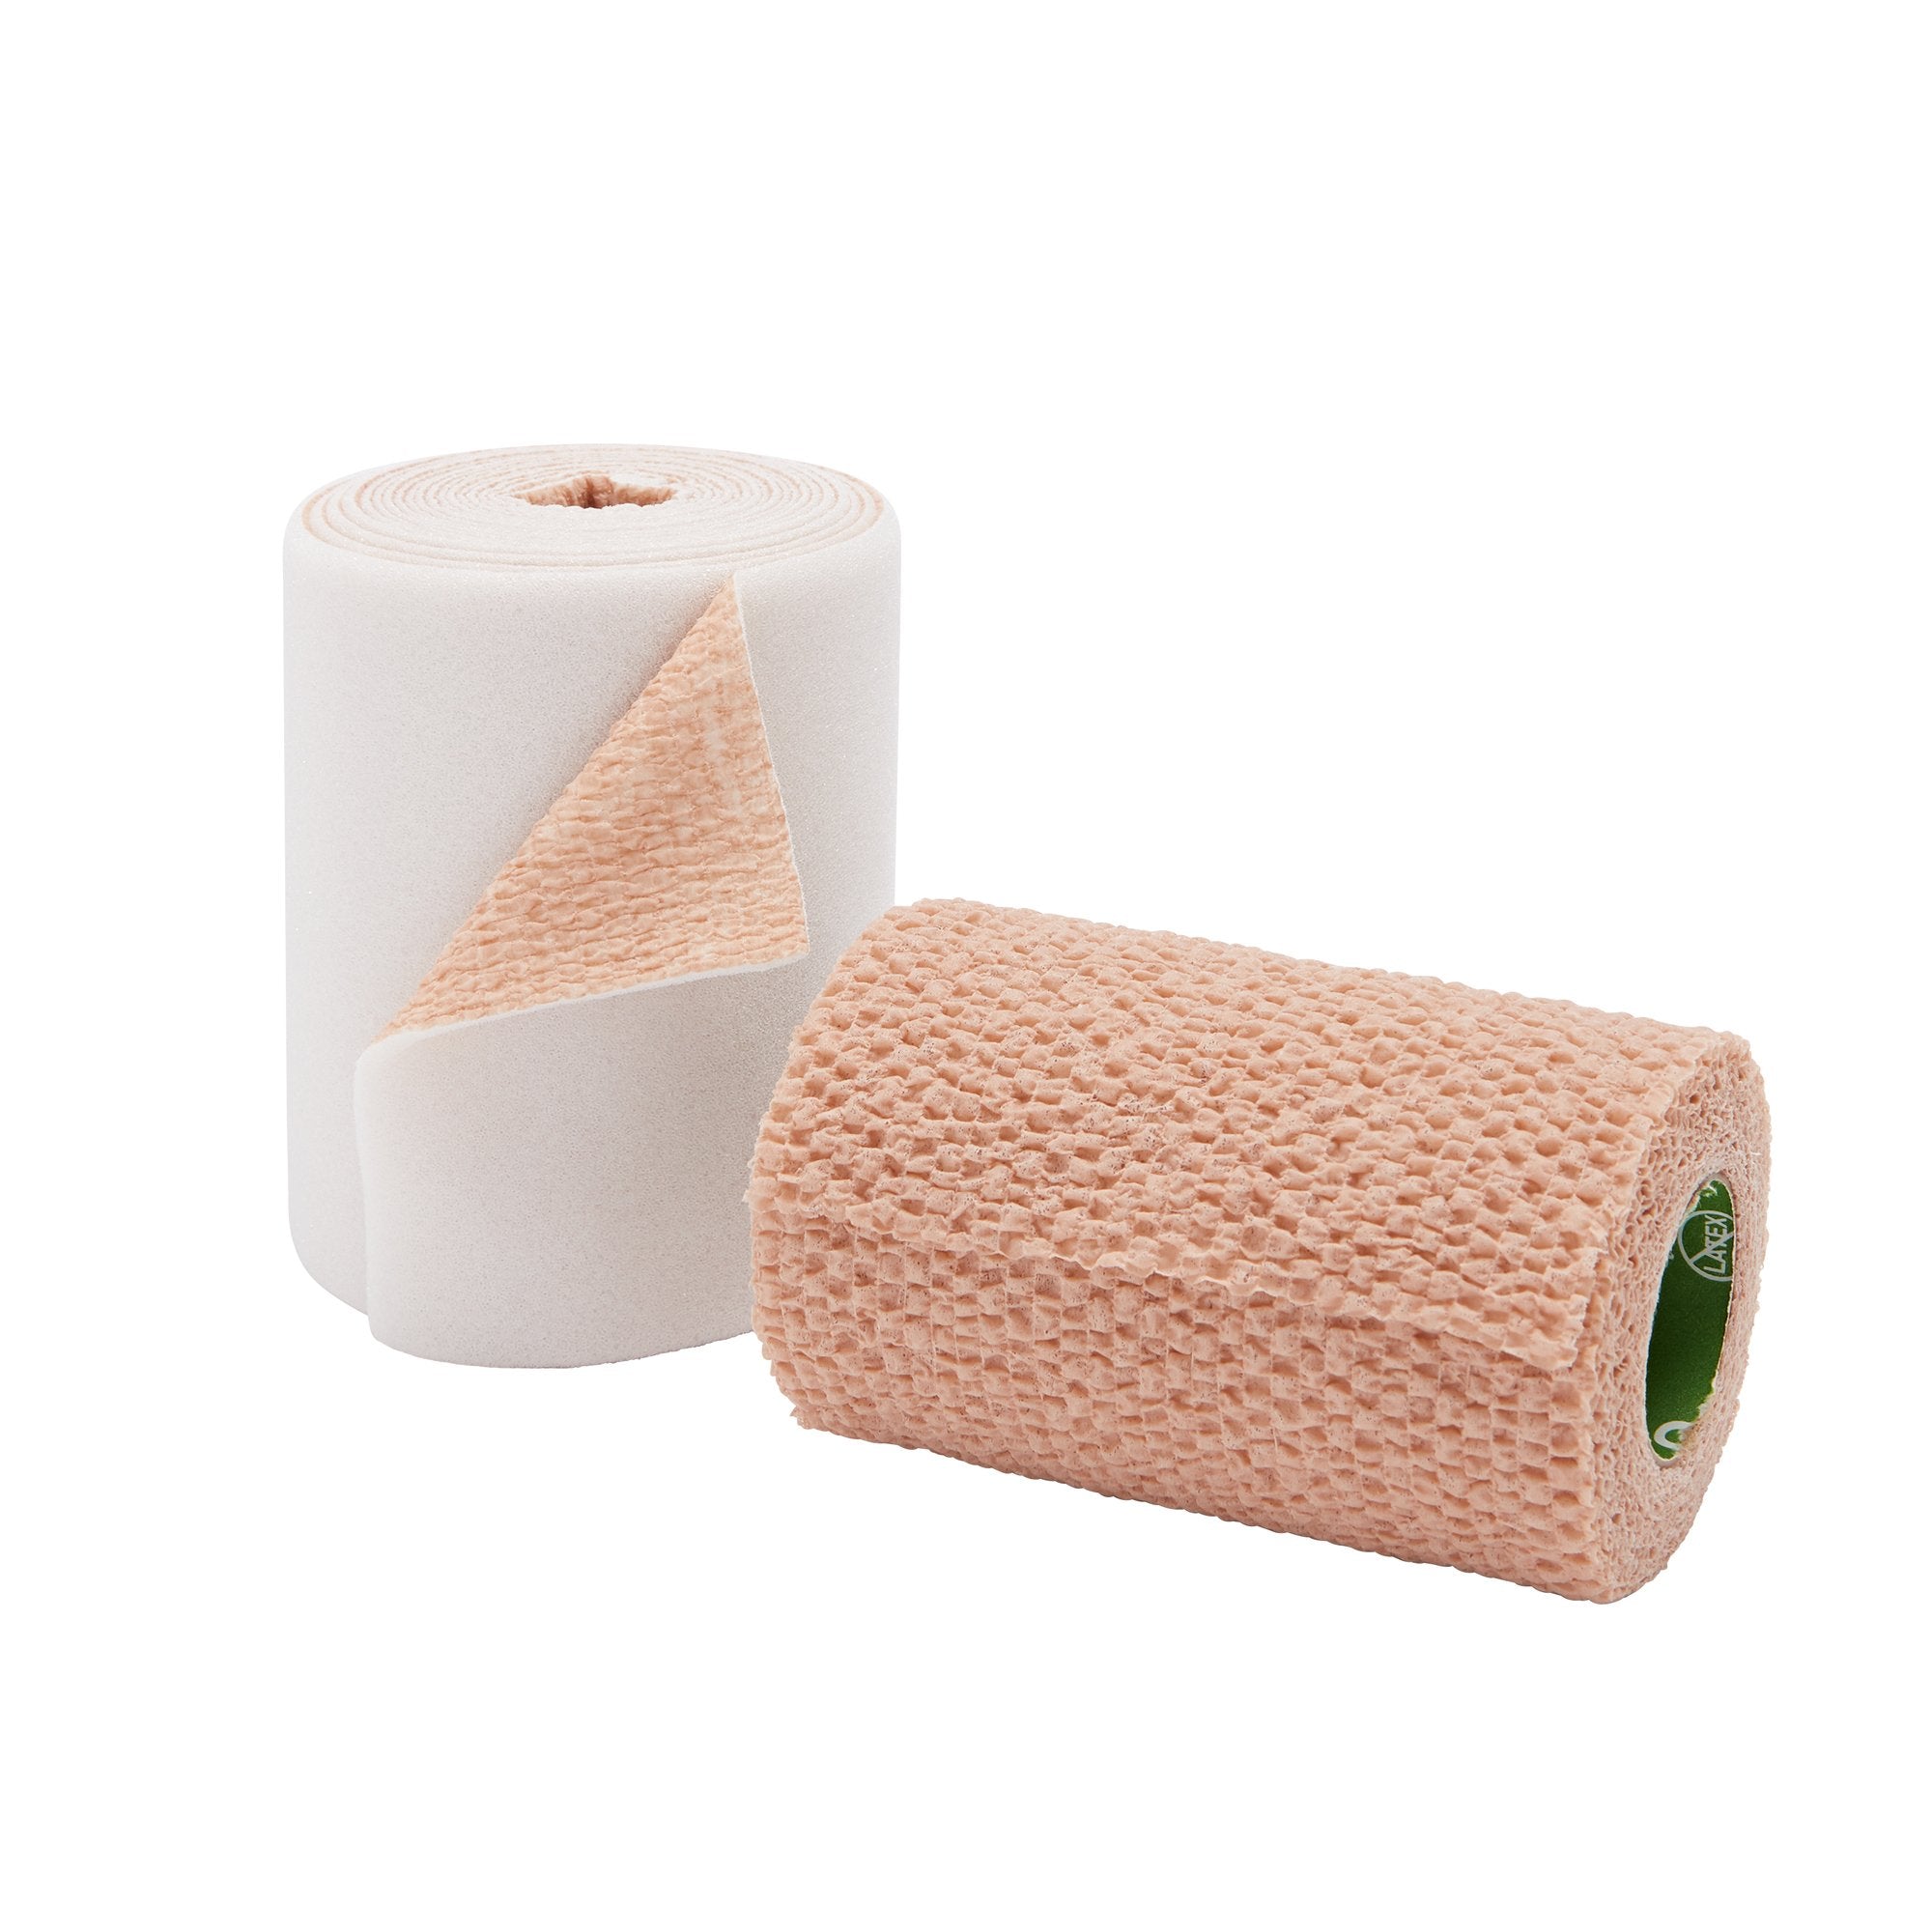 2 Layer Compression Bandage System 3M Coban2 Lite 4 Inch X 2-9/10 Yard / 4 Inch X 5-1/10 Yard 25 to 30 mmHg Self-adherent / Pull On Closure Tan / White NonSterile